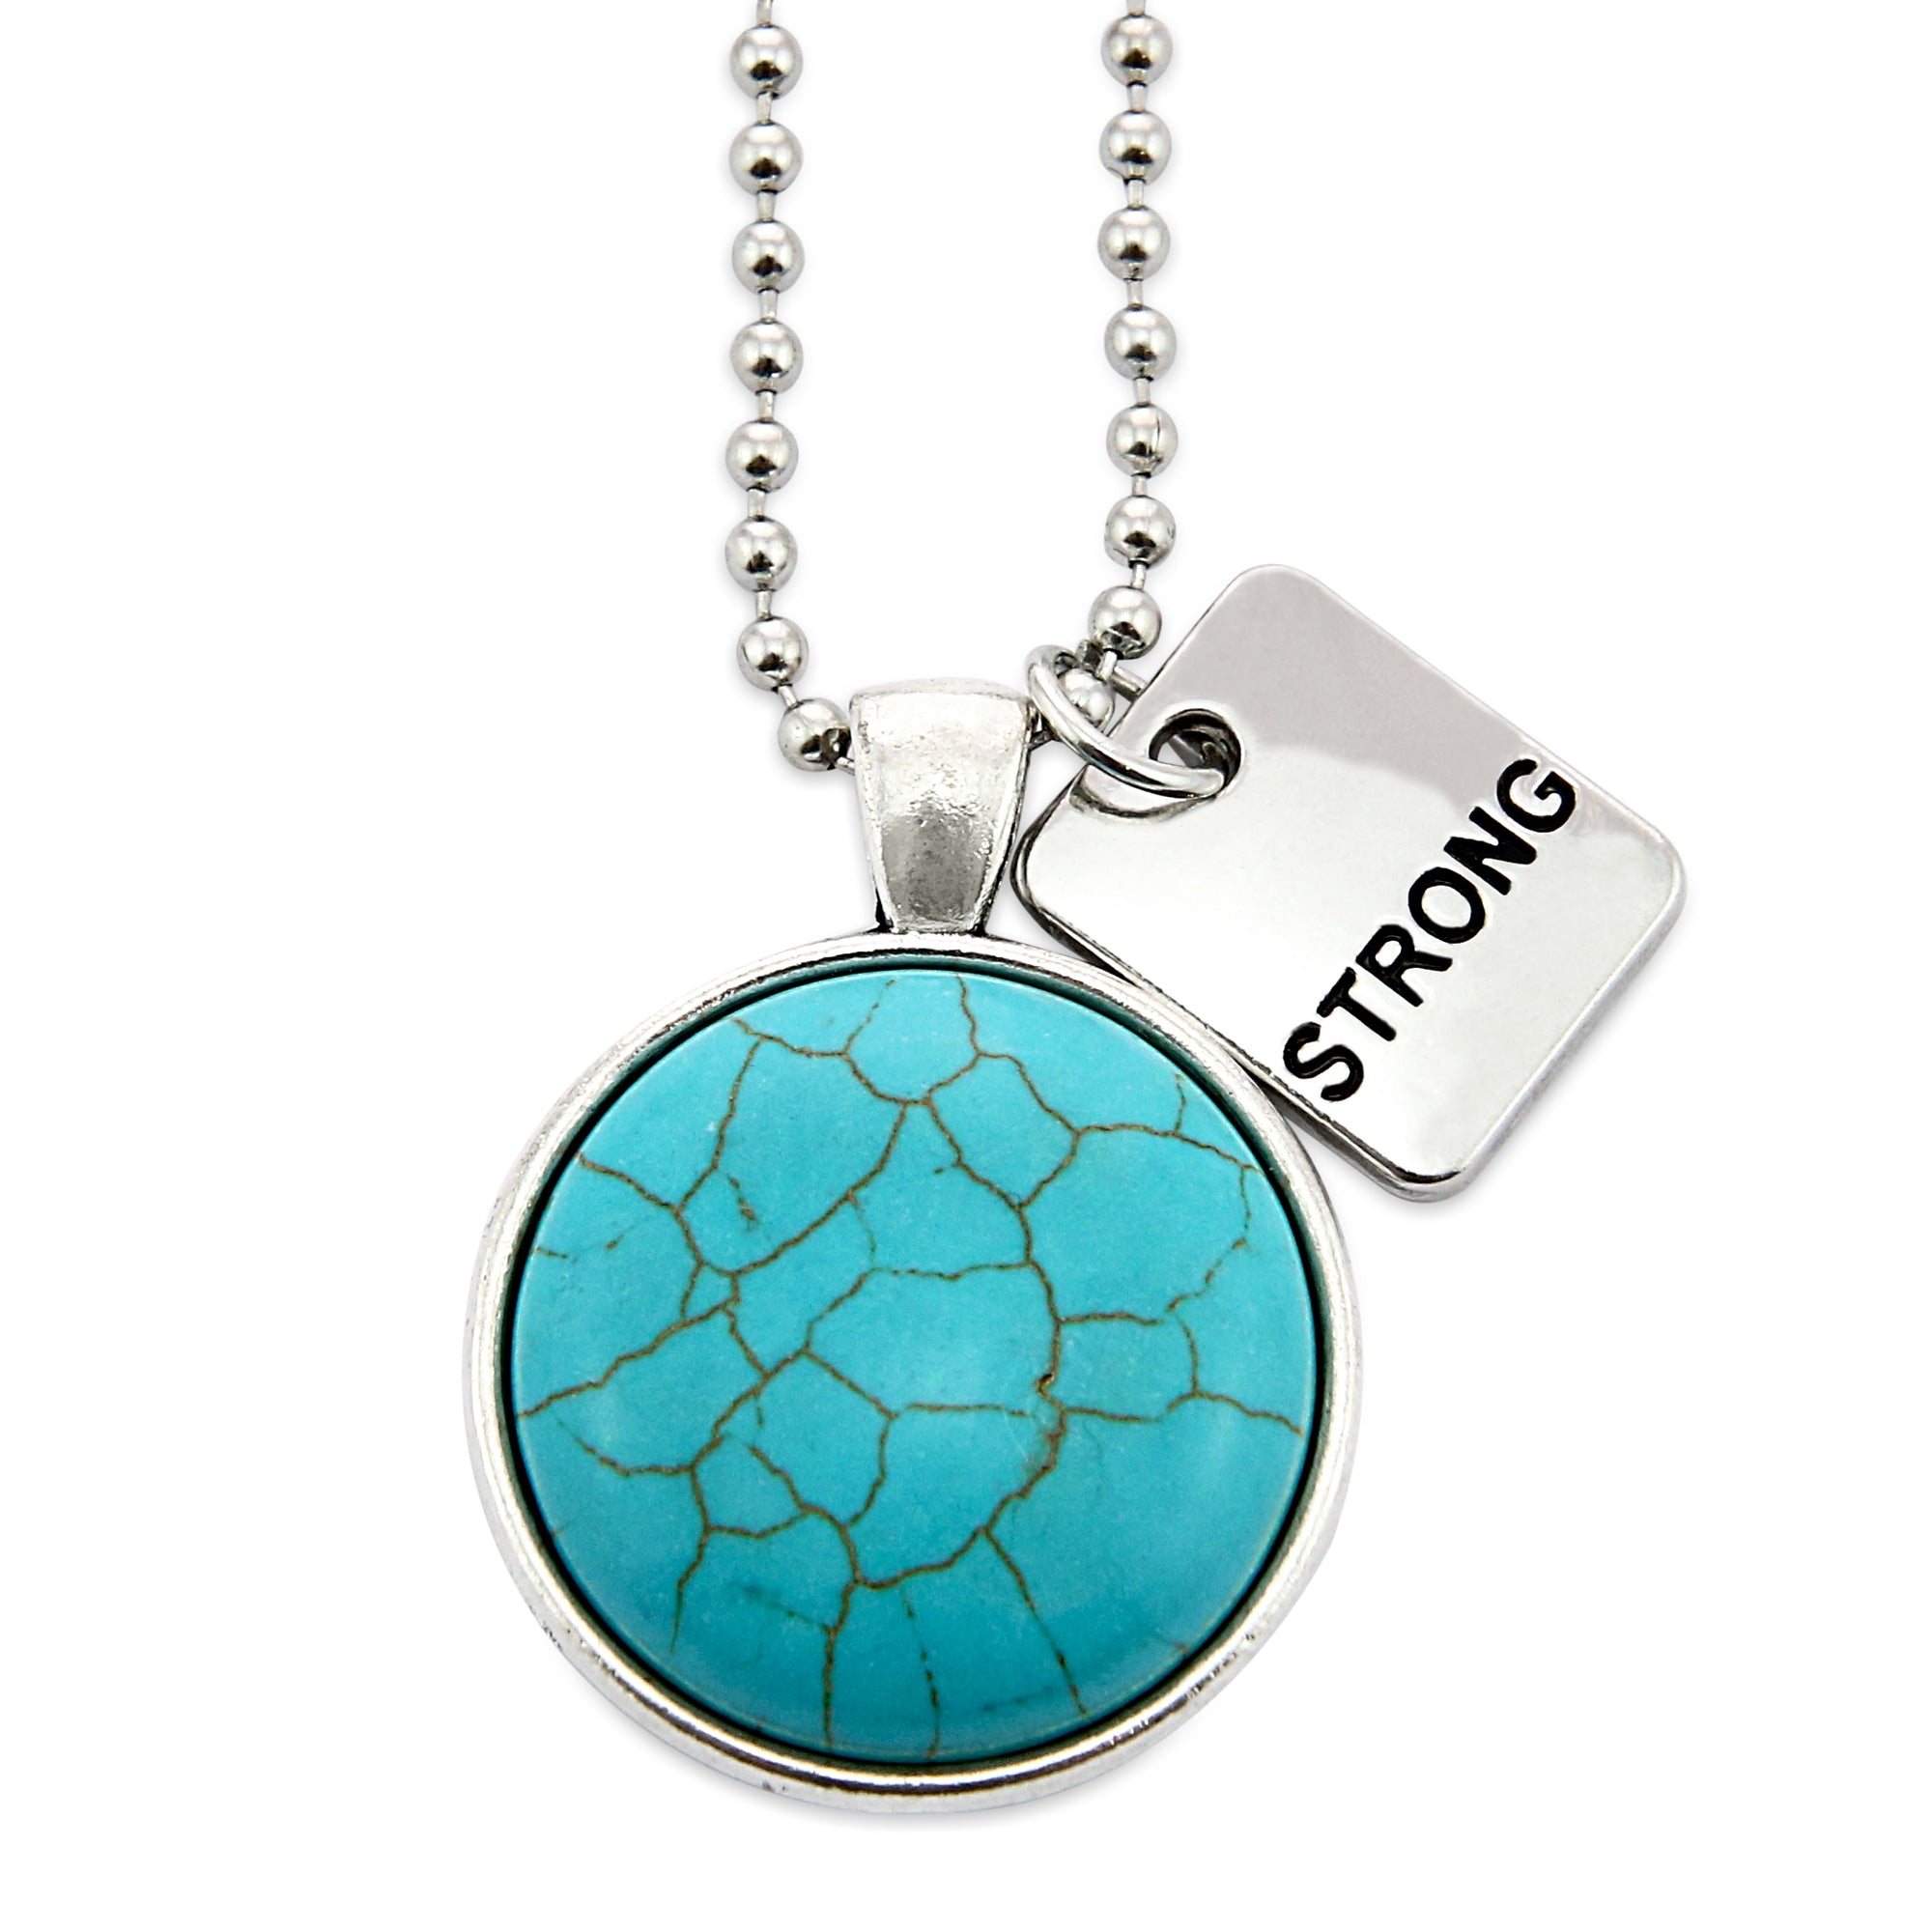 Heart & Soul Collection - Turquoise Stone in Vintage Silver 'STRONG' Necklace (10951)